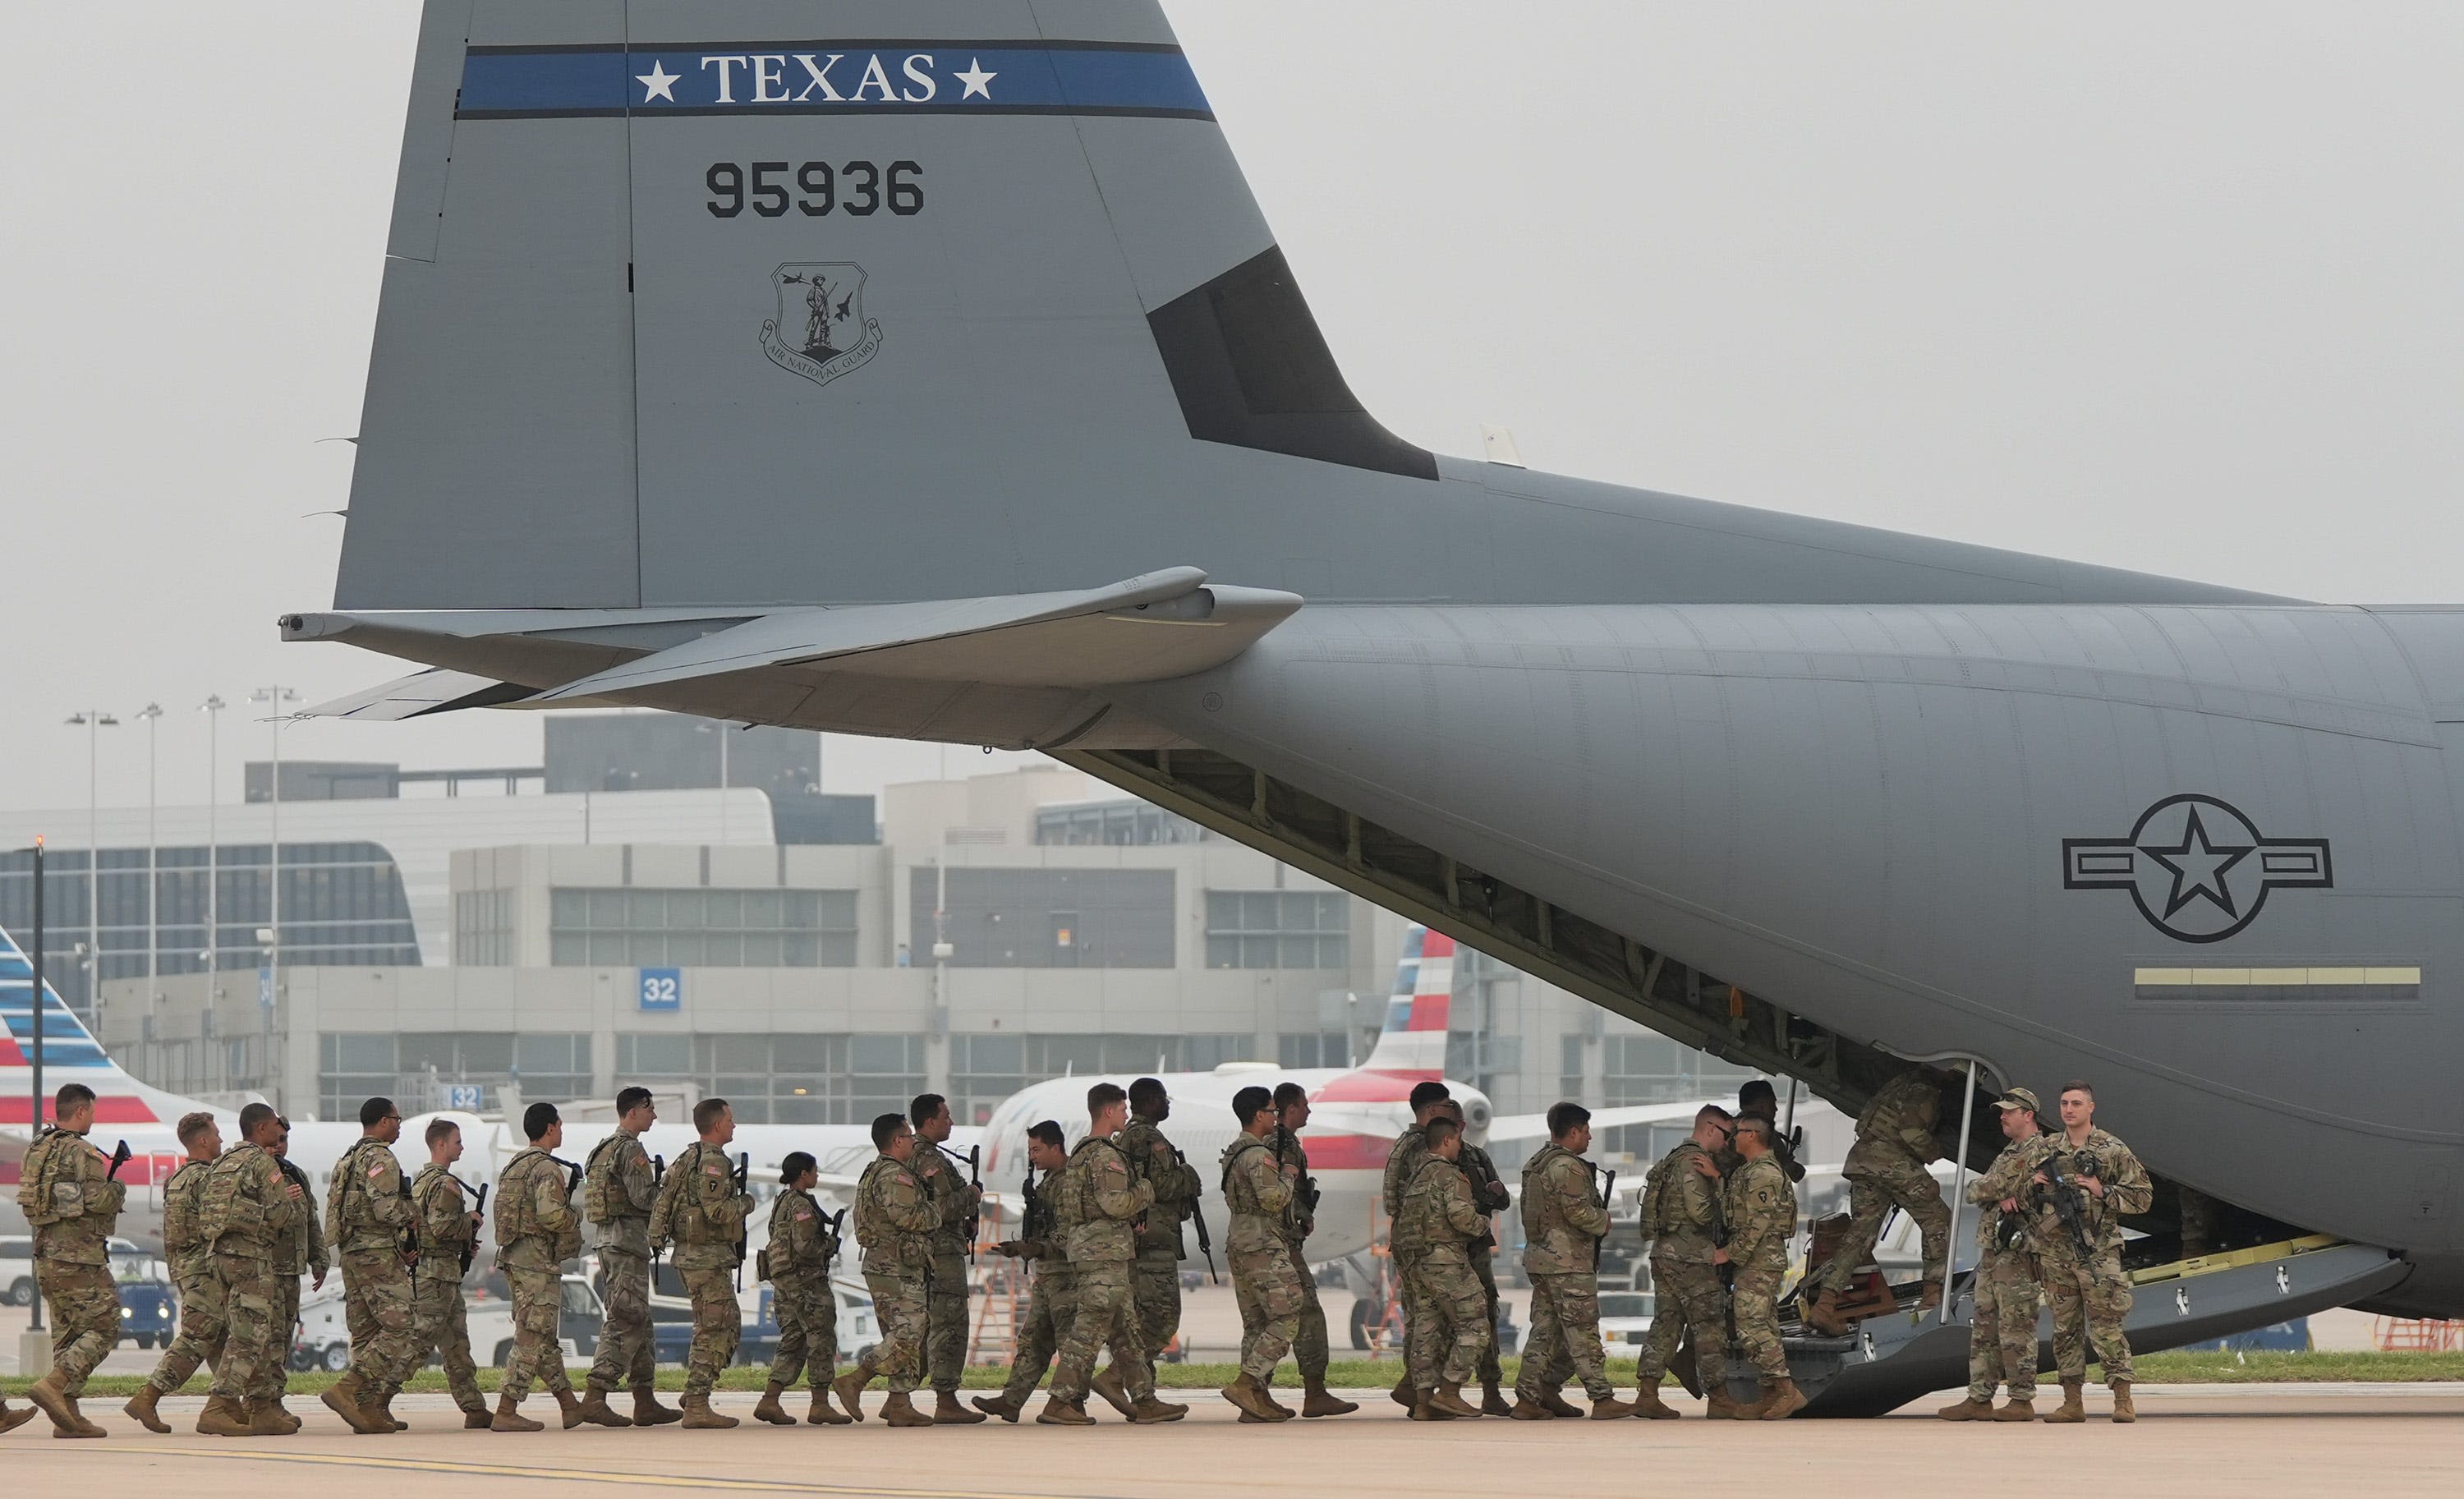 Why Abbott joined all US governors in opposing Air Force proposal to move some Guard troops